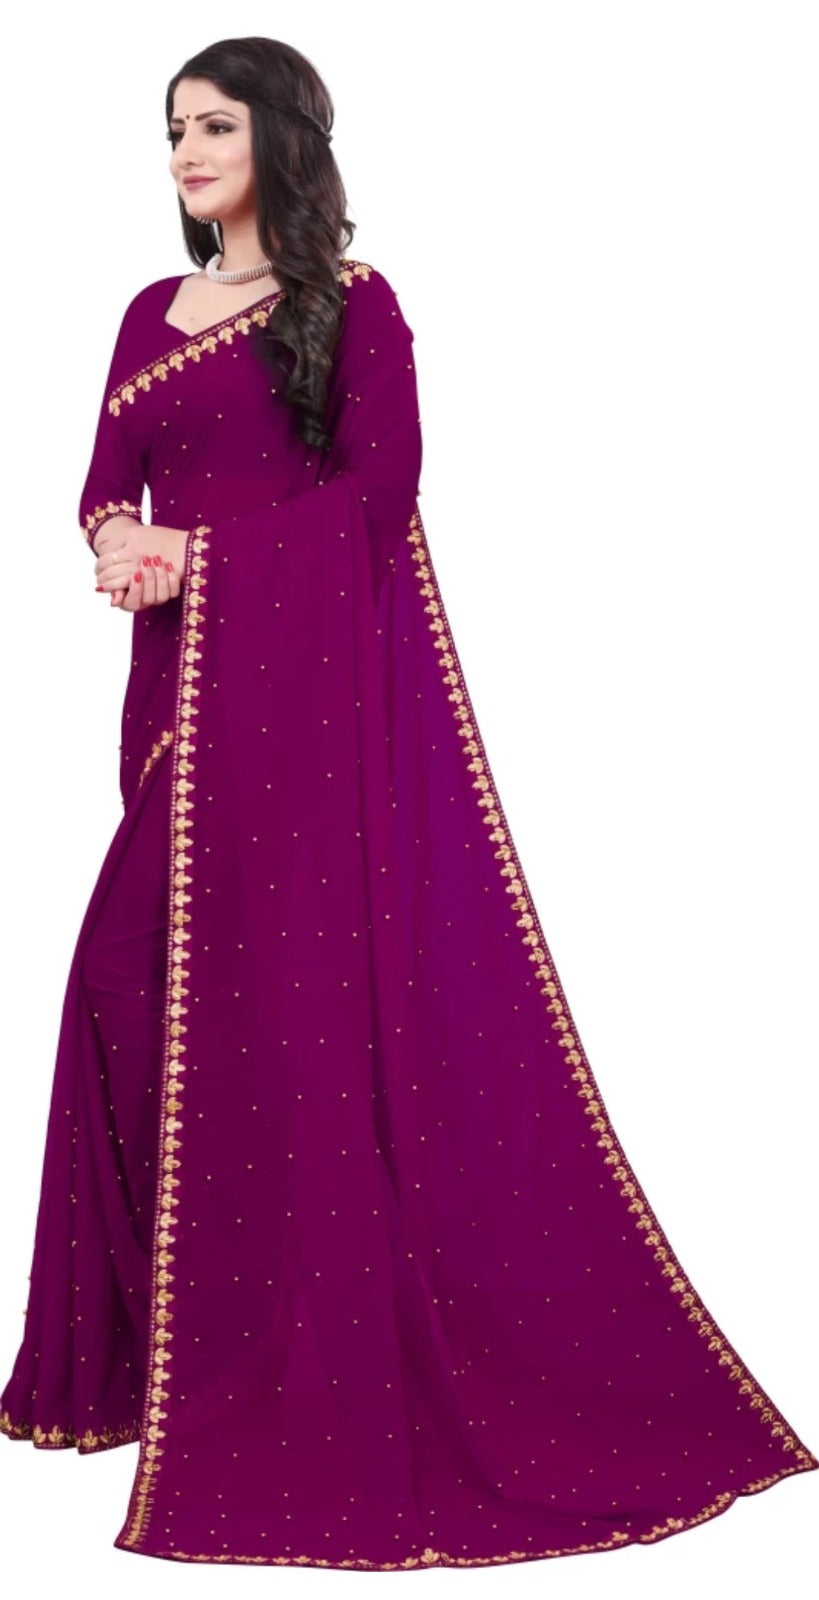 Women's Embroider Border with Placement Mirror Work Lycra Blend Saree With Blouse Piece (Purple) - NIMIDHYA